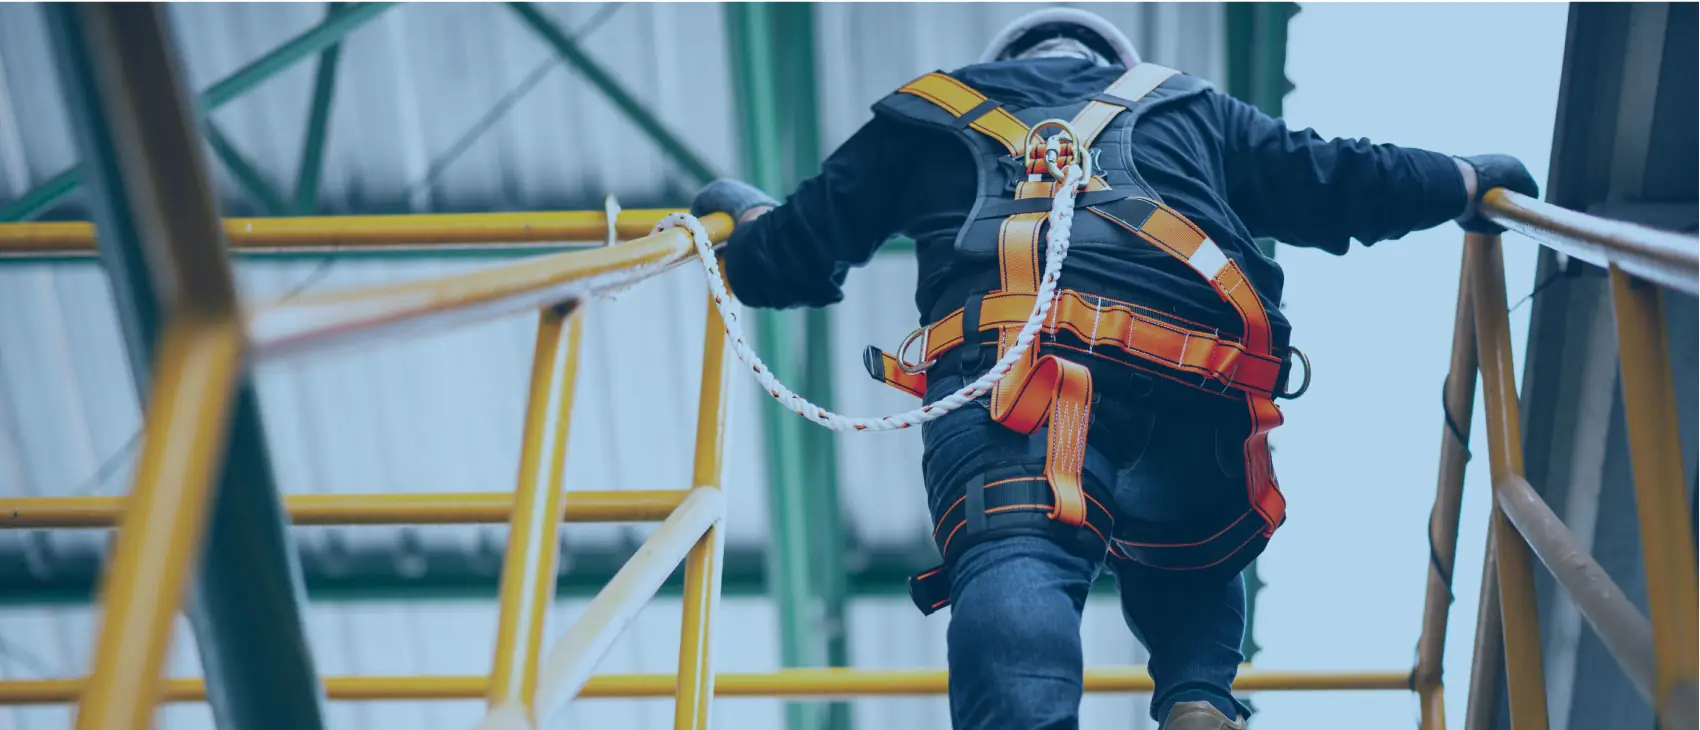 Worker wearing a safety harness walking up stairs